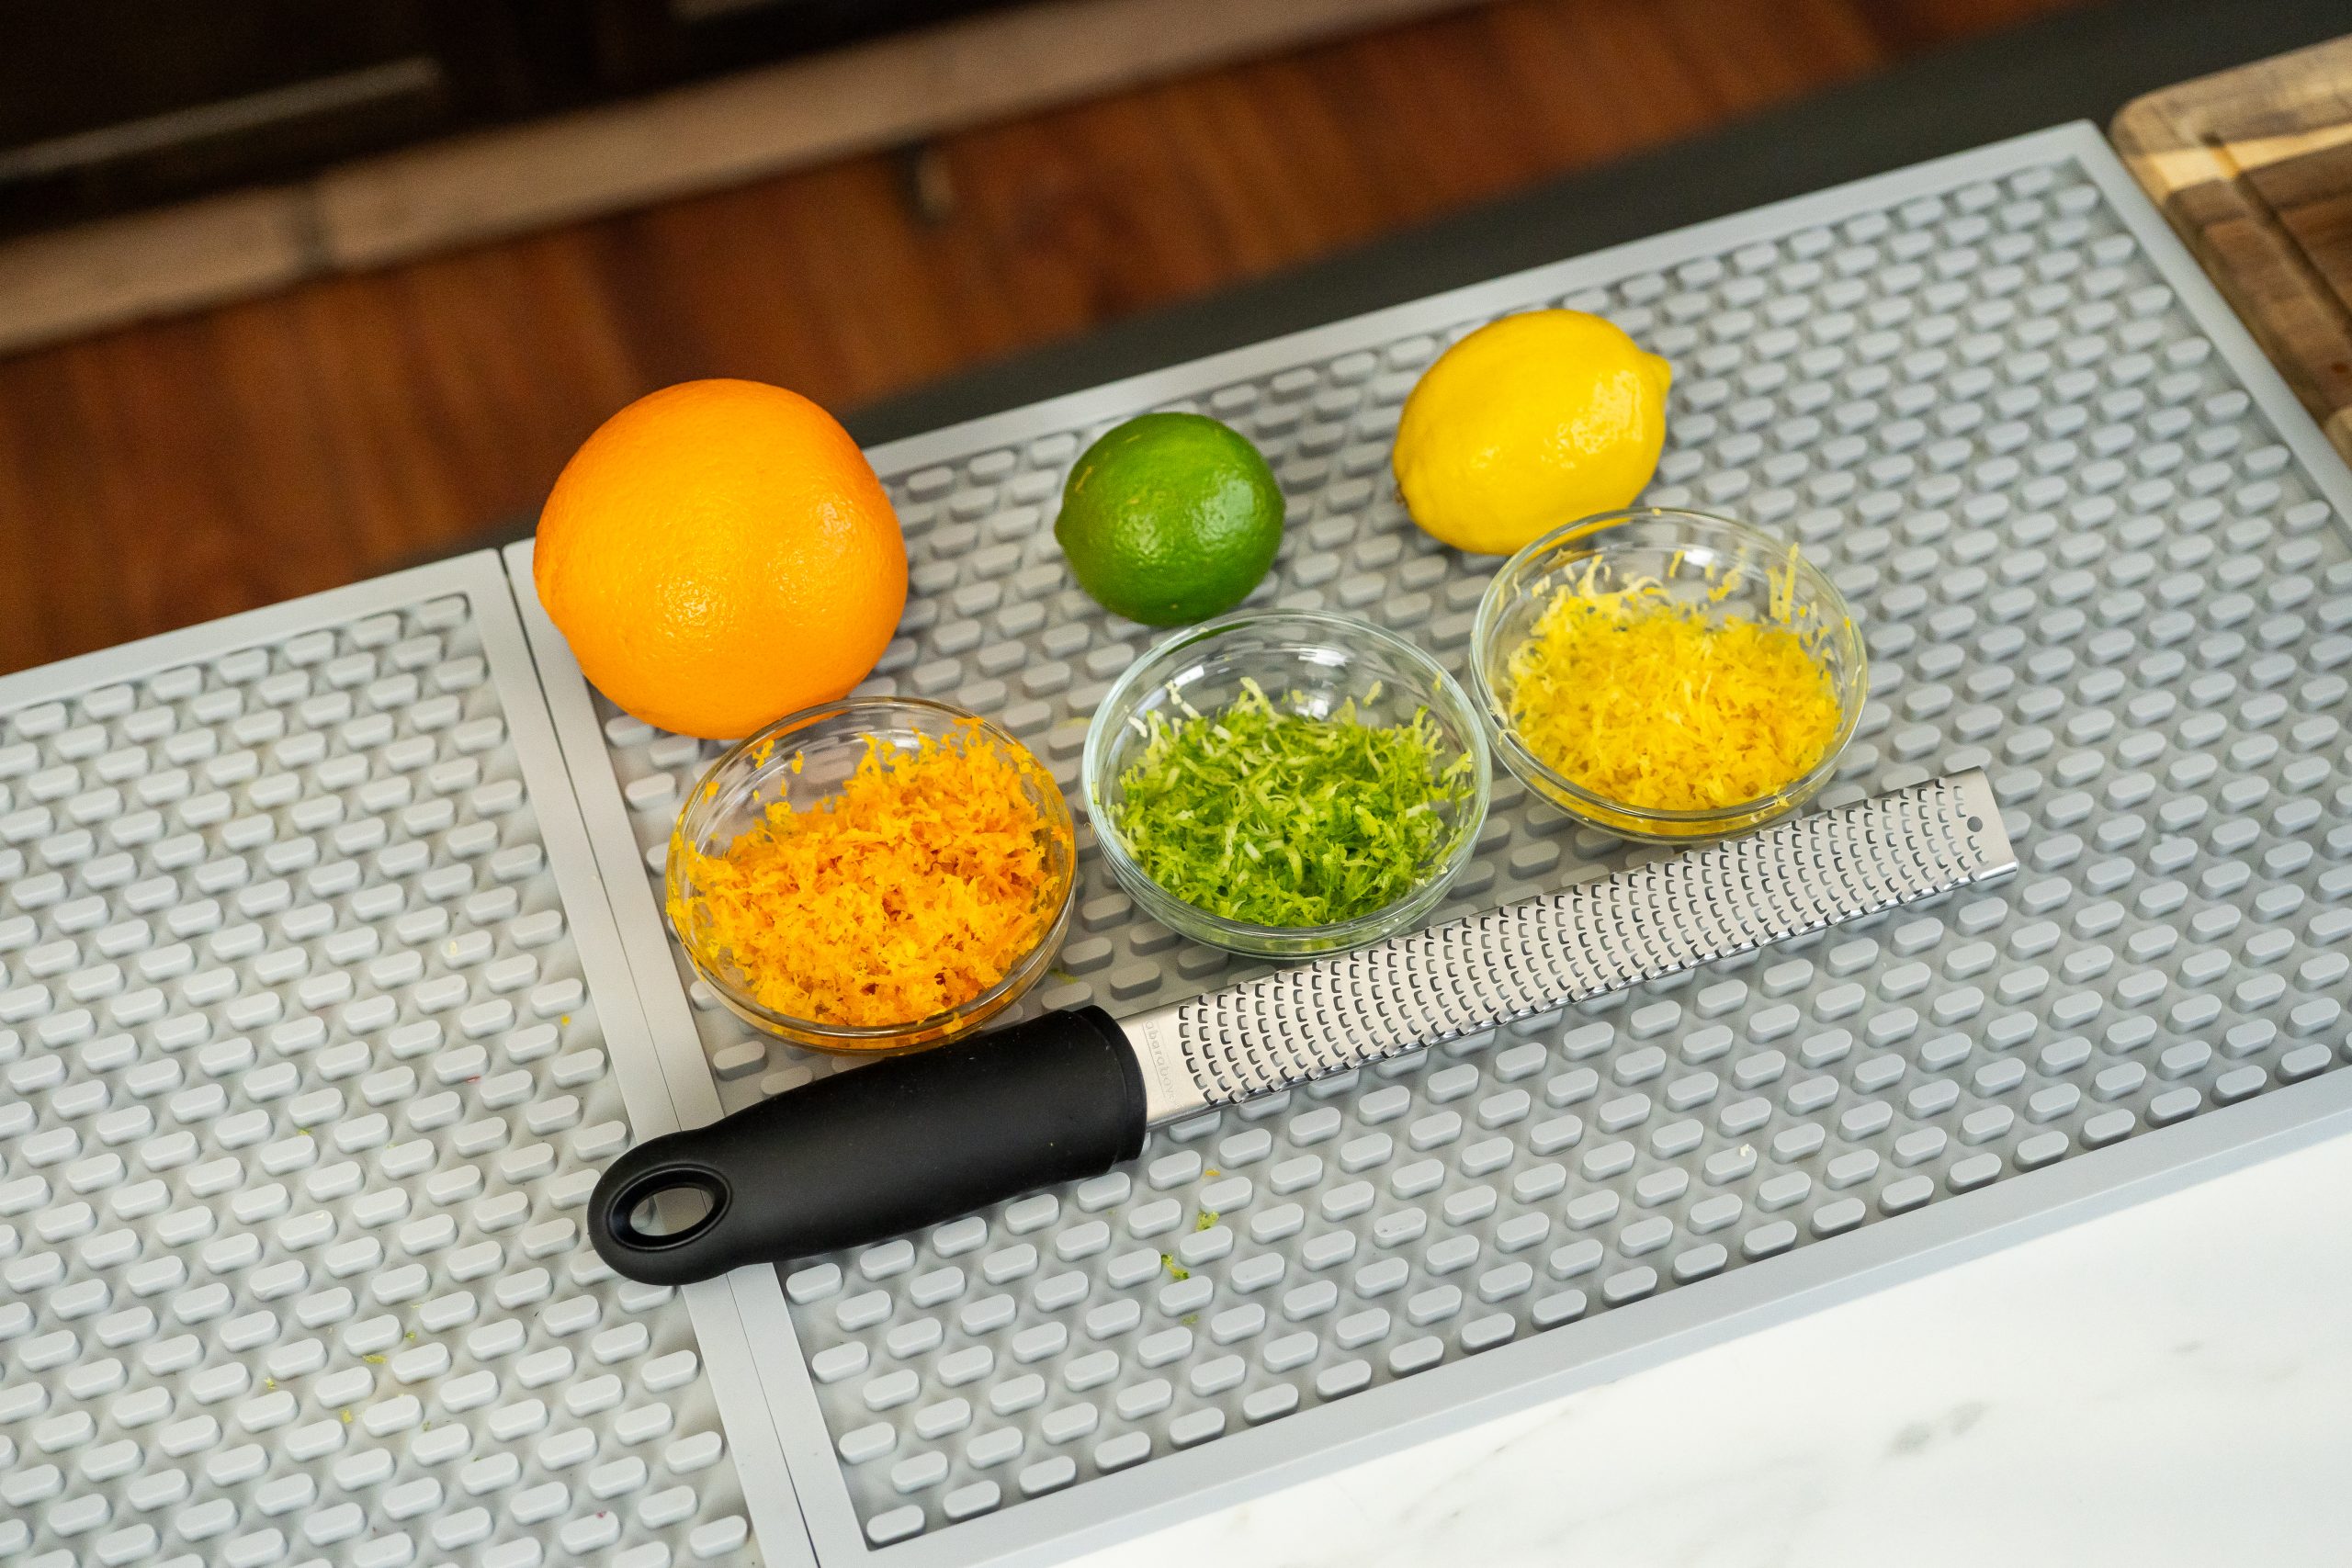 Citrus zester with zest from orange, lemon, and lime